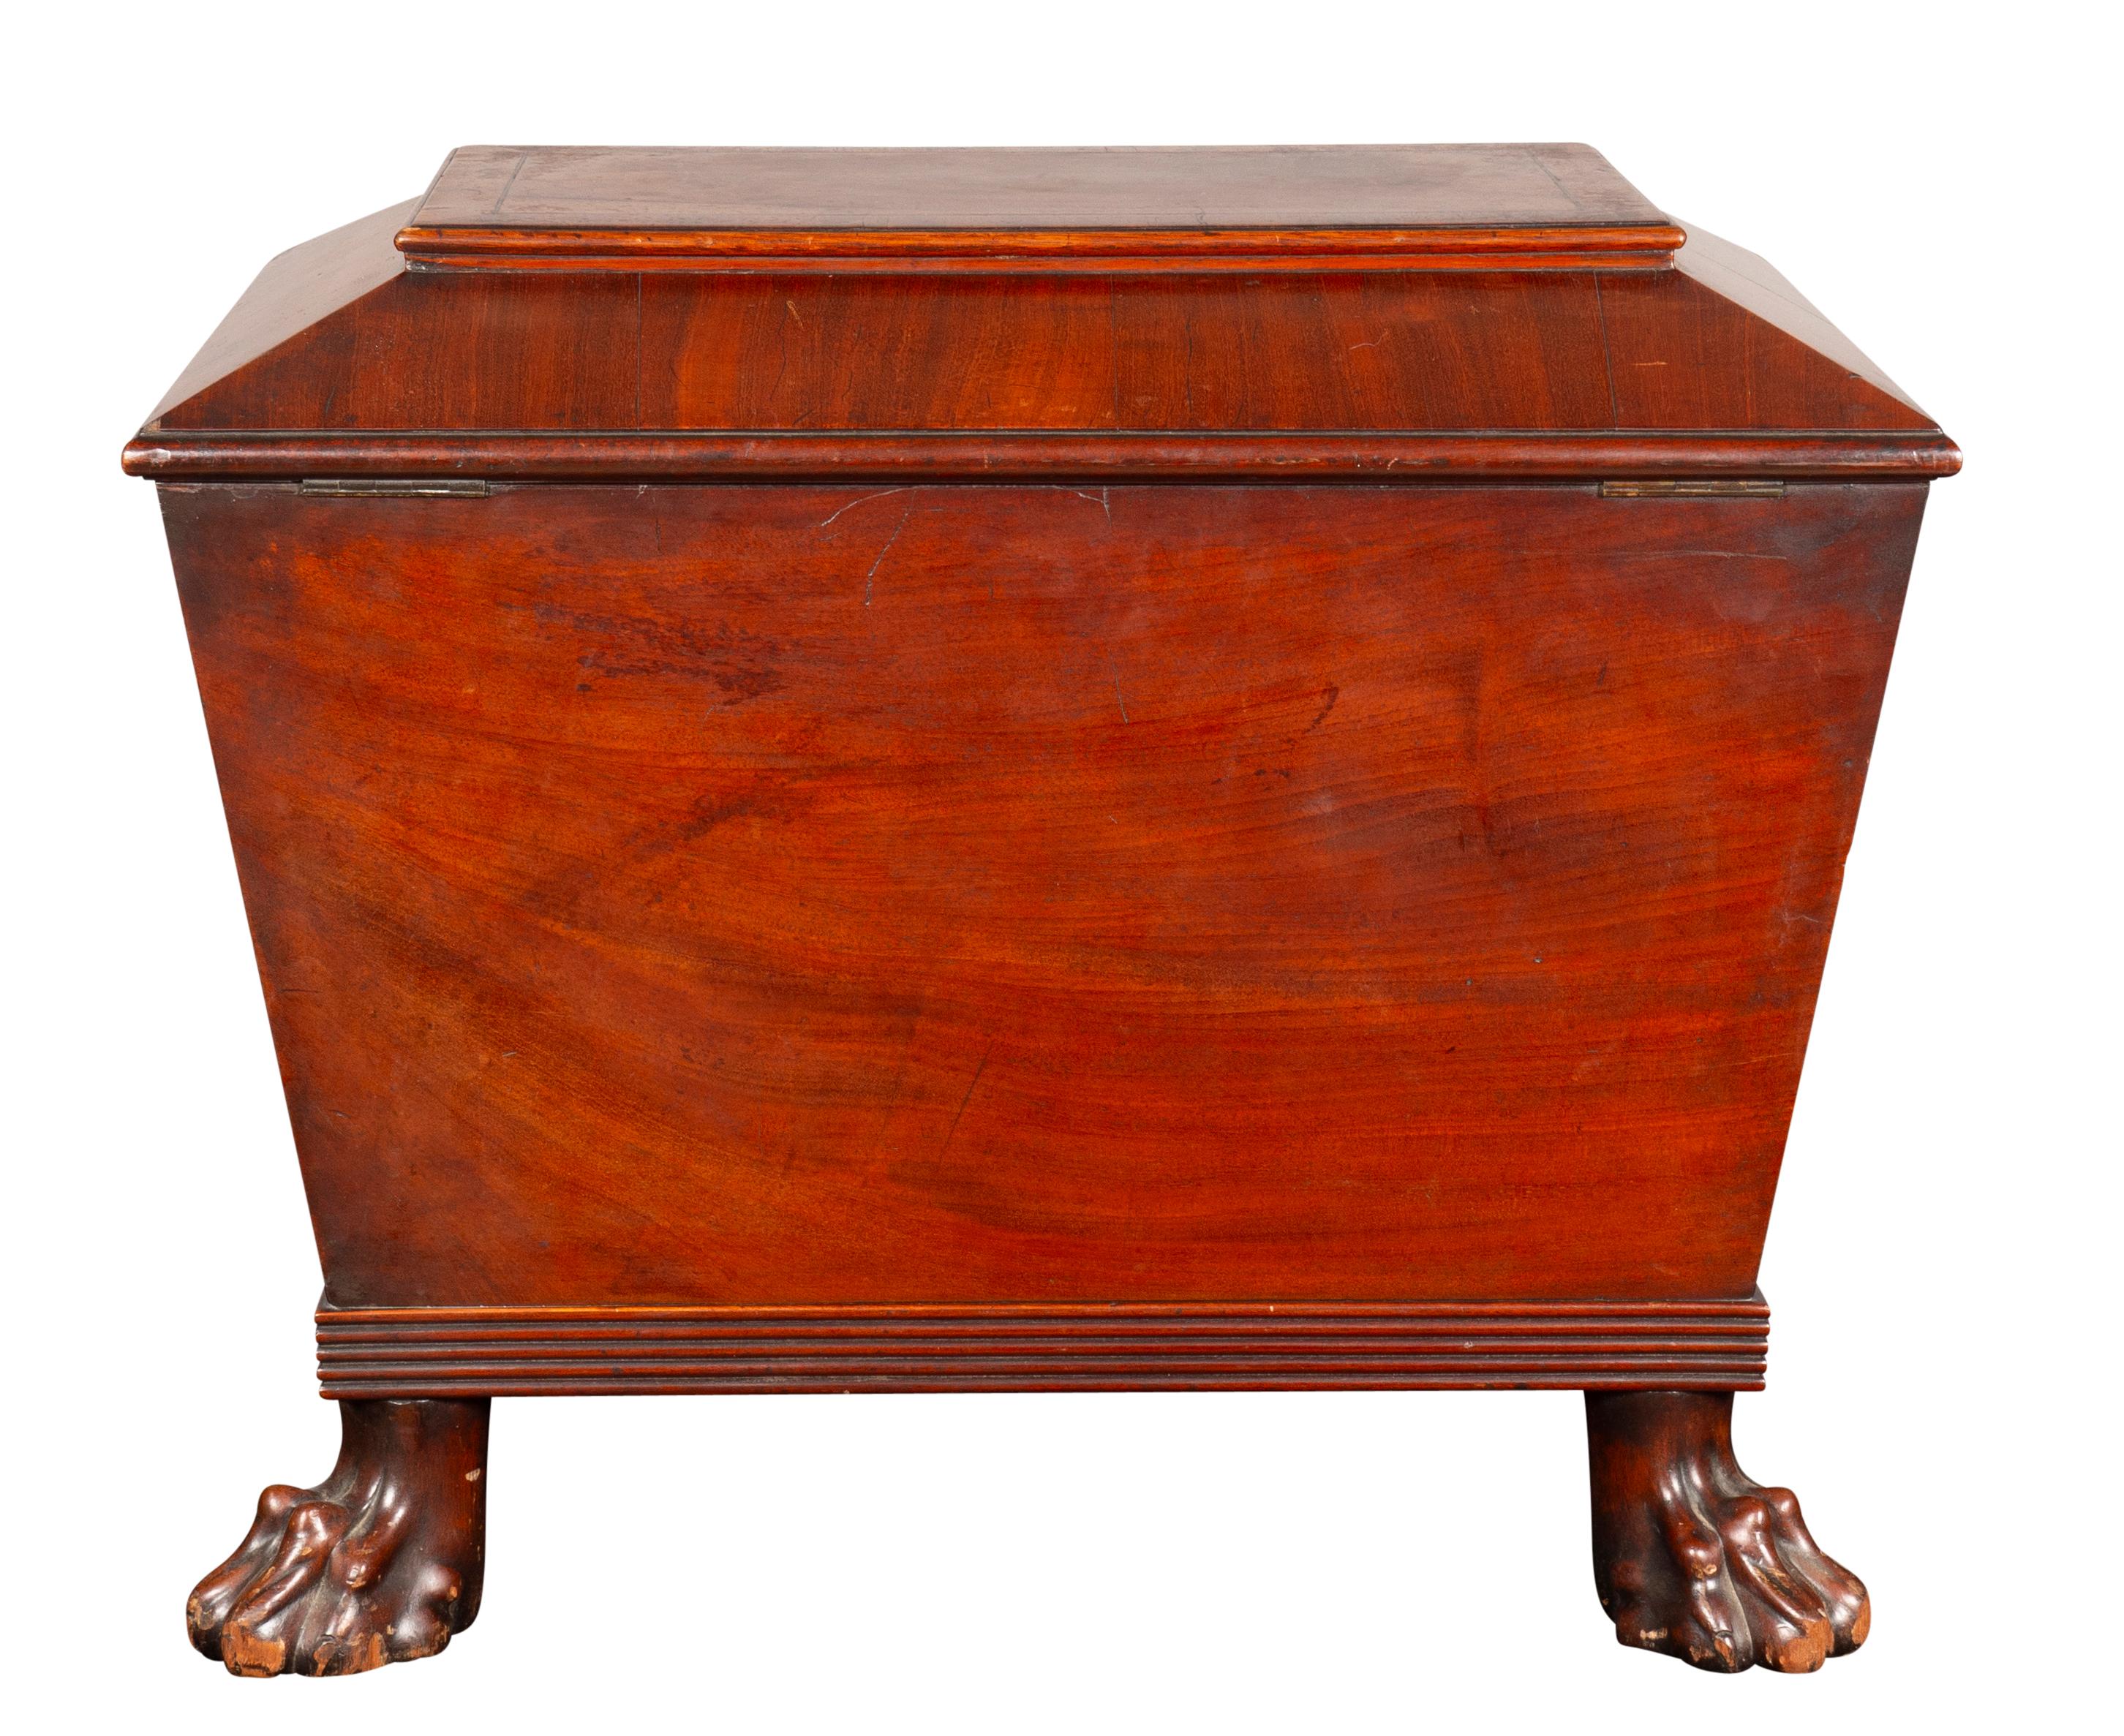 Regency Mahogany Wine Cooler In Good Condition For Sale In Essex, MA